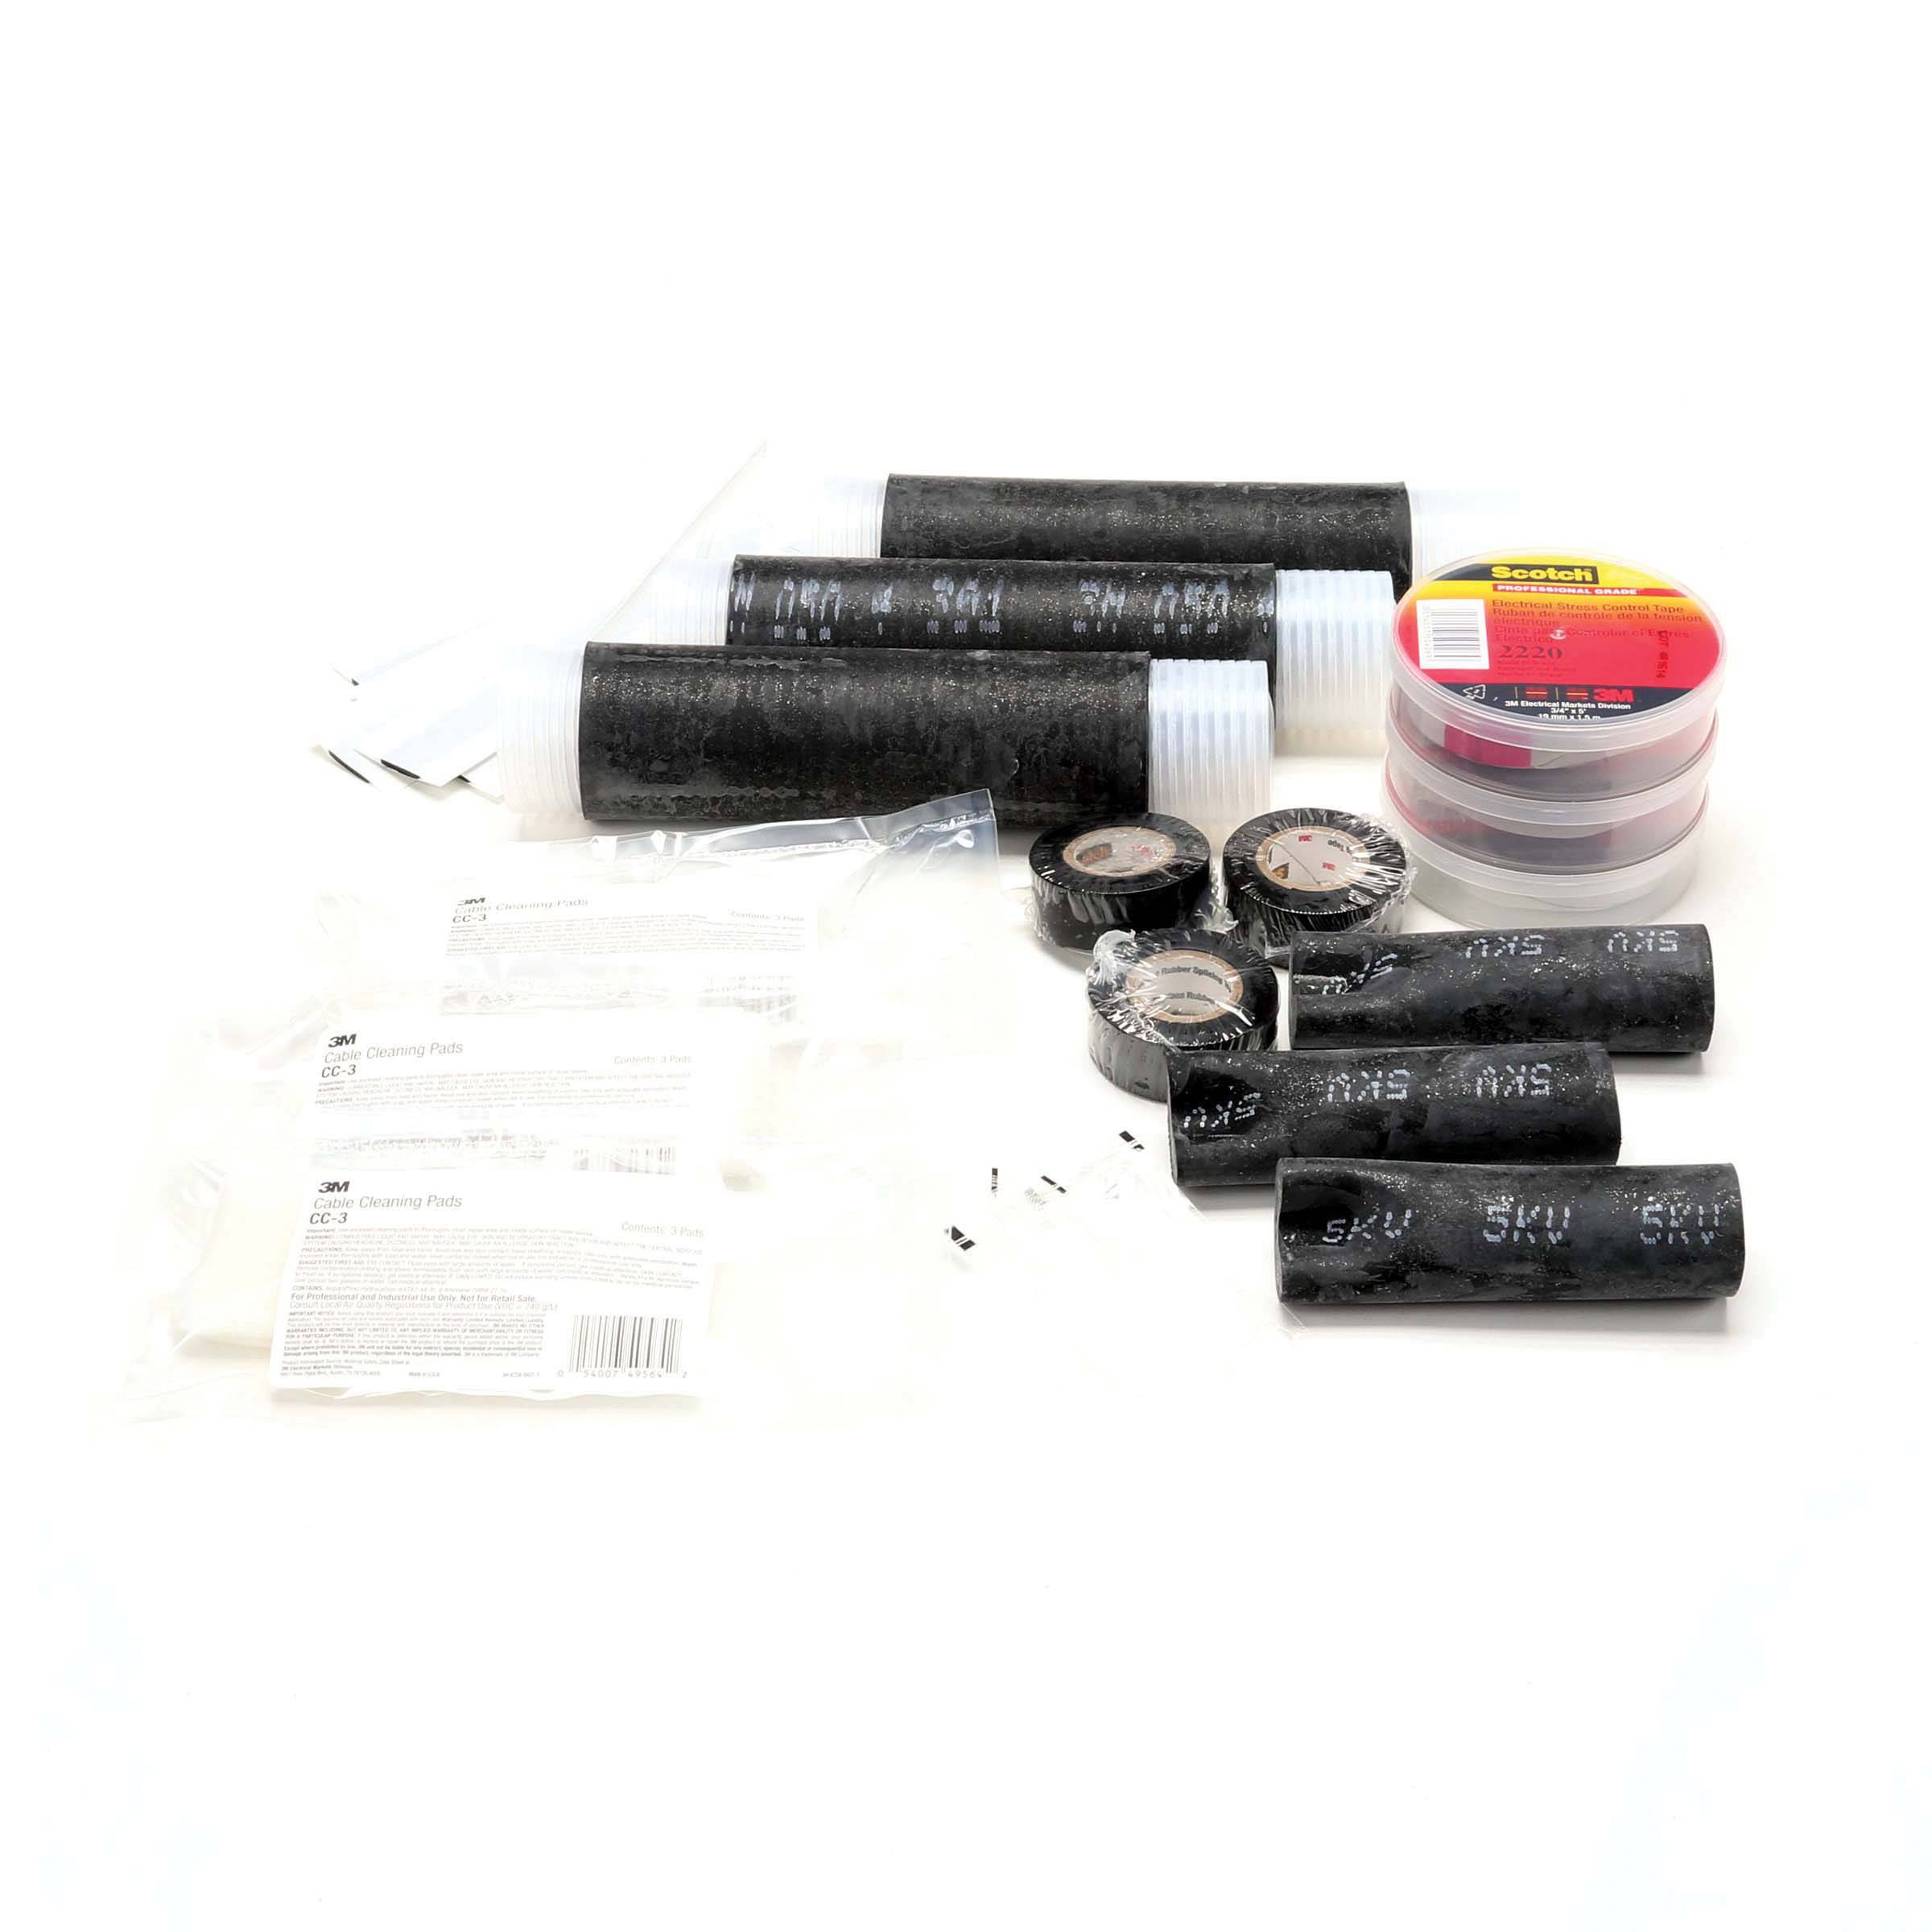 5 to 8 kV, 3M 5323 Motor Lead Pigtail Splice Kit (Discontinued by Manufacturer)